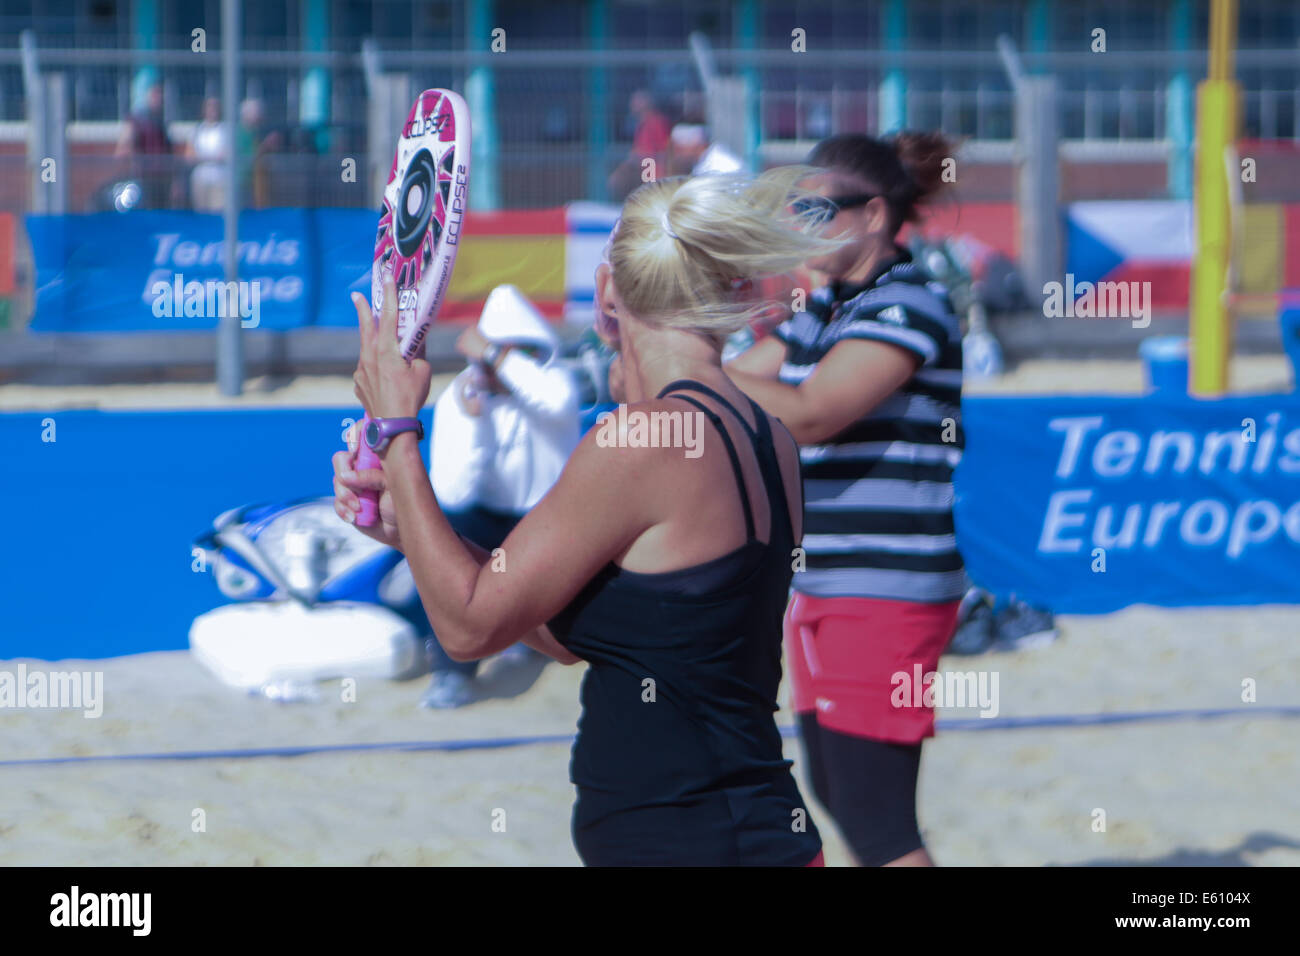 City of Brighton & Hove, East Sussex, UK. European Beach Tennis Championships 2014 Brighton, Yellow Wave, Madeira Drive, Brighton, Sussex, UK. In this image the women's doubles team from Hungary take shelter behind their rackets from the wind blowing through court 1. 10th August 2014 Stock Photo